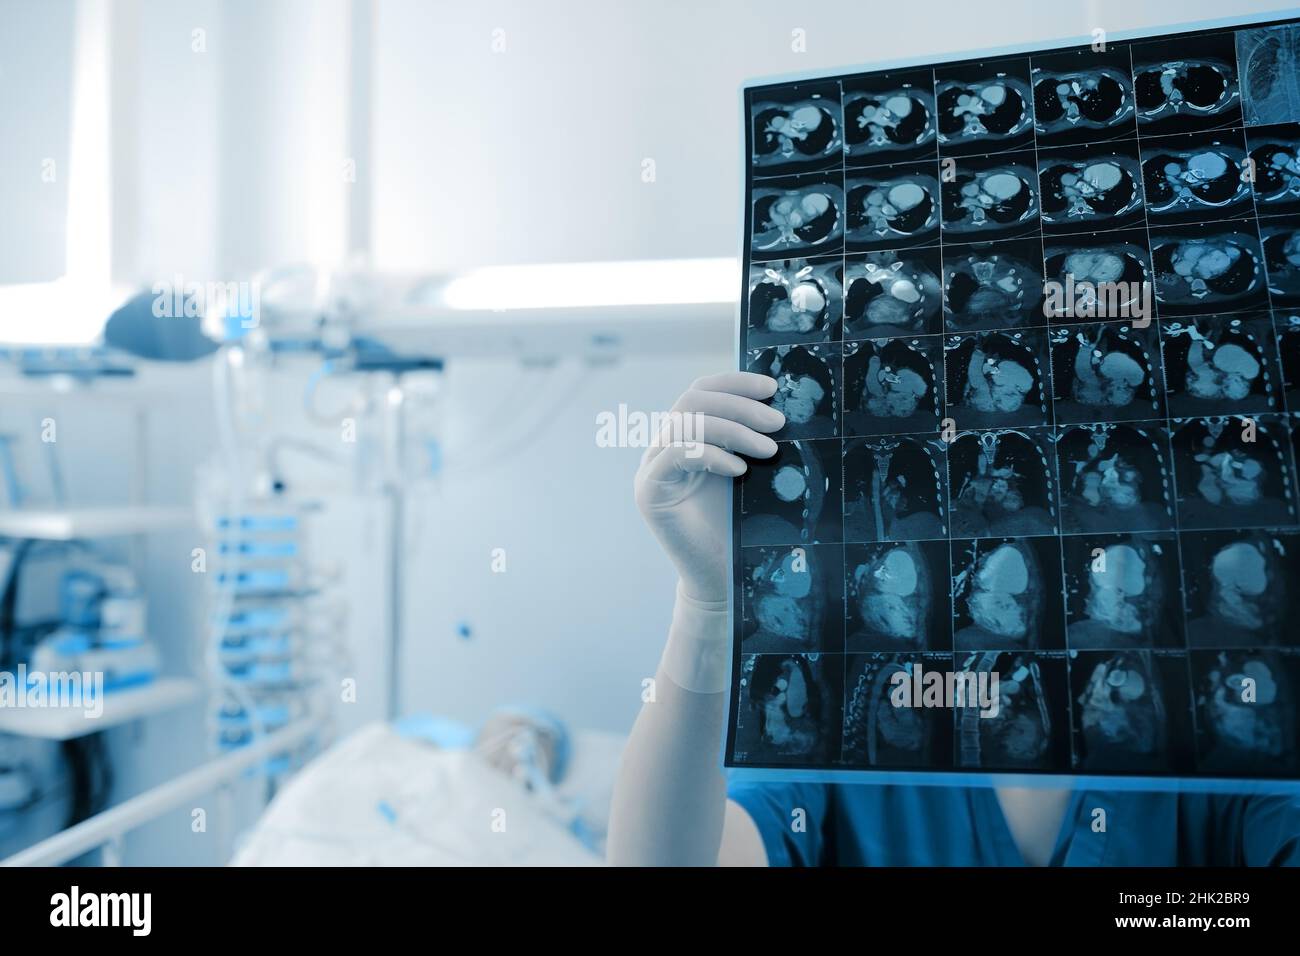 Female doctor looks at the scan image of patient thoracic organs in the hospital room. Stock Photo